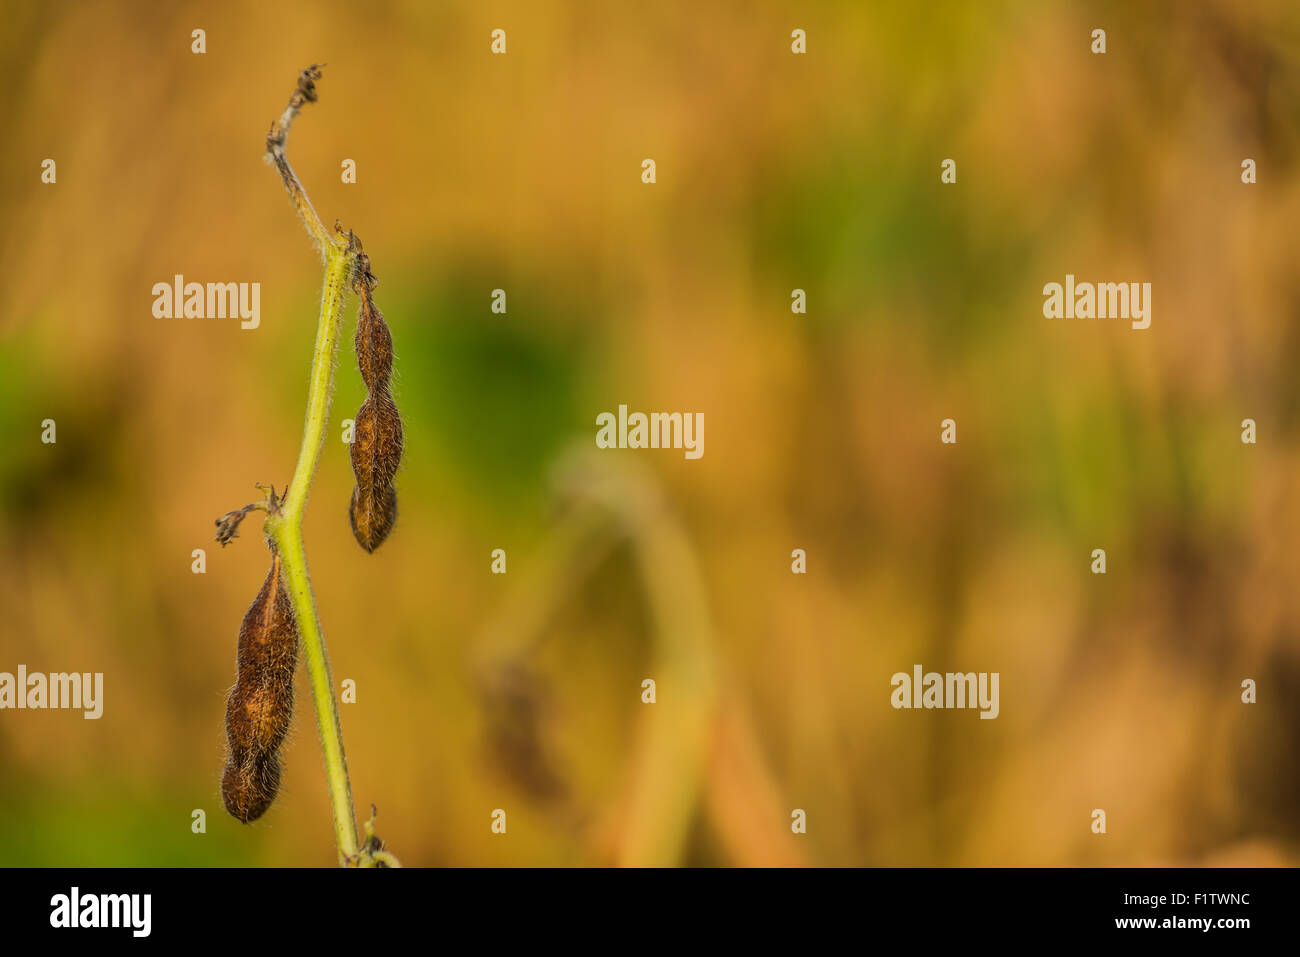 Soybean crops in field, soya bean growing on plantation, selective focus. Stock Photo